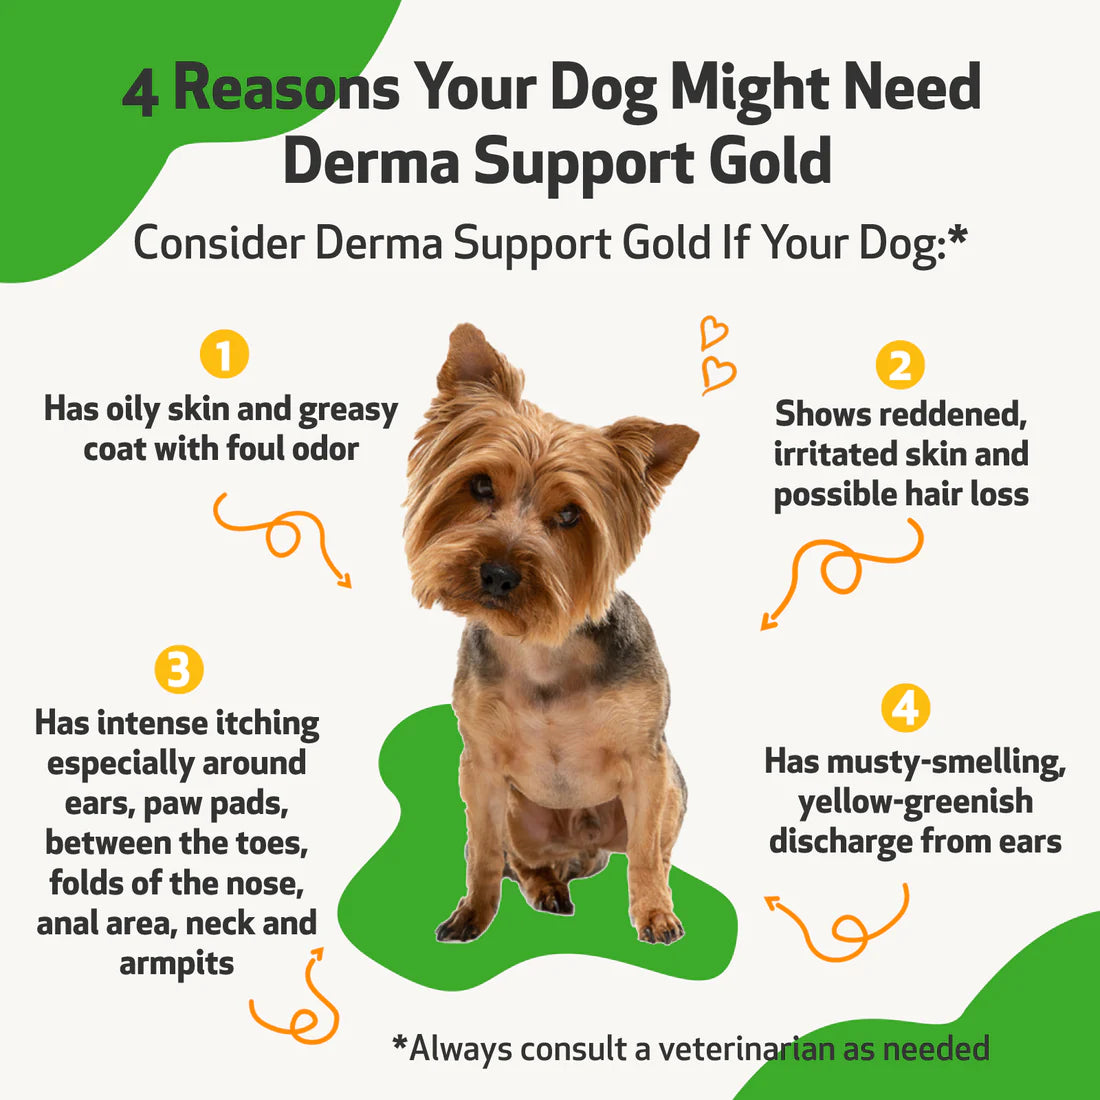 Pet Wellbeing - Derma Support Gold (Dogs) - 2oz